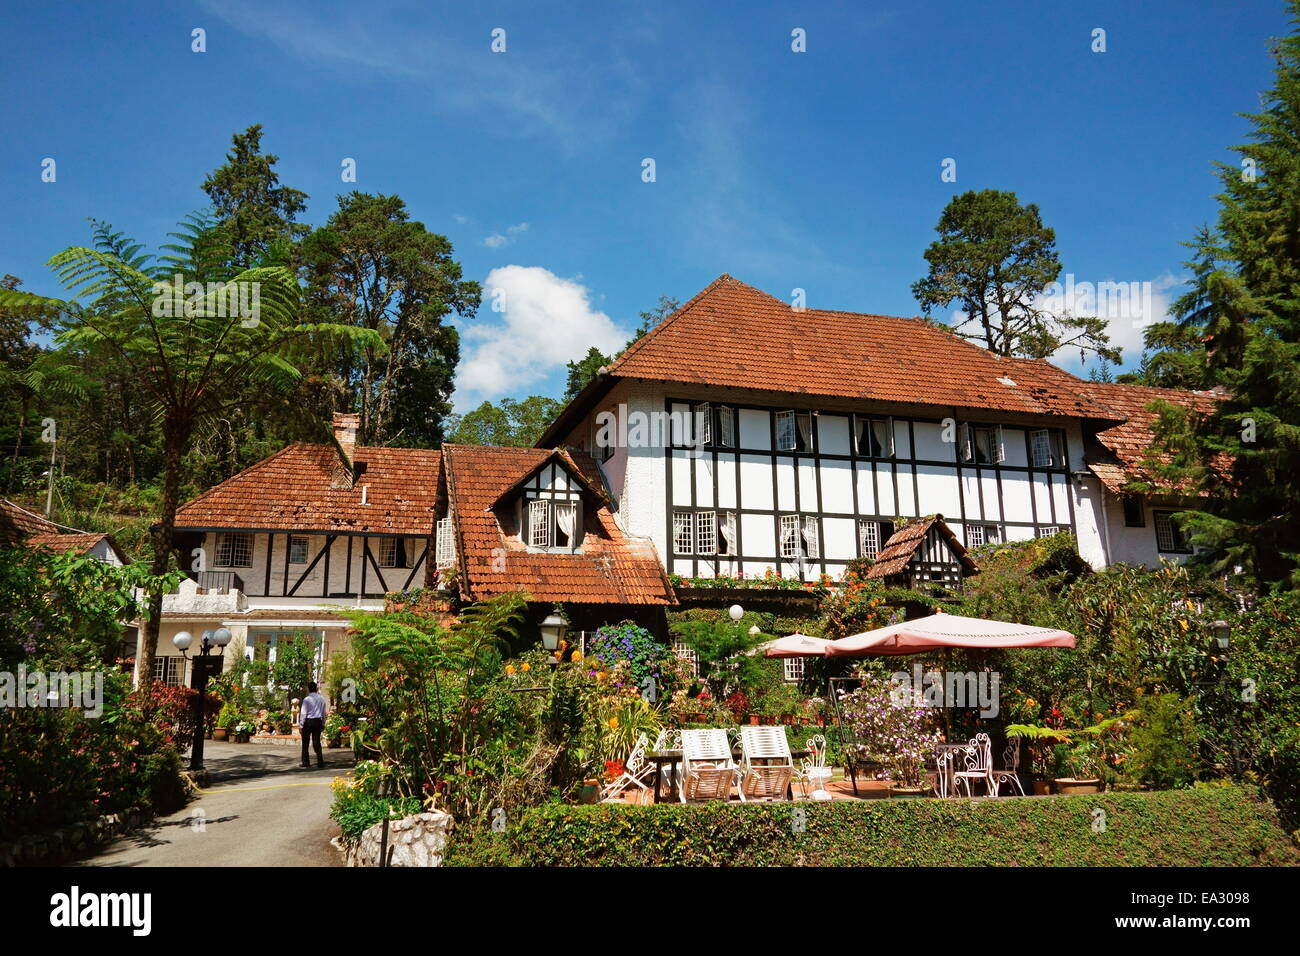 The Smokehouse Hotel and Restaurant, Cameron Highlands, Pahang, Malaysia, Southeast Asia, Asia Stock Photo